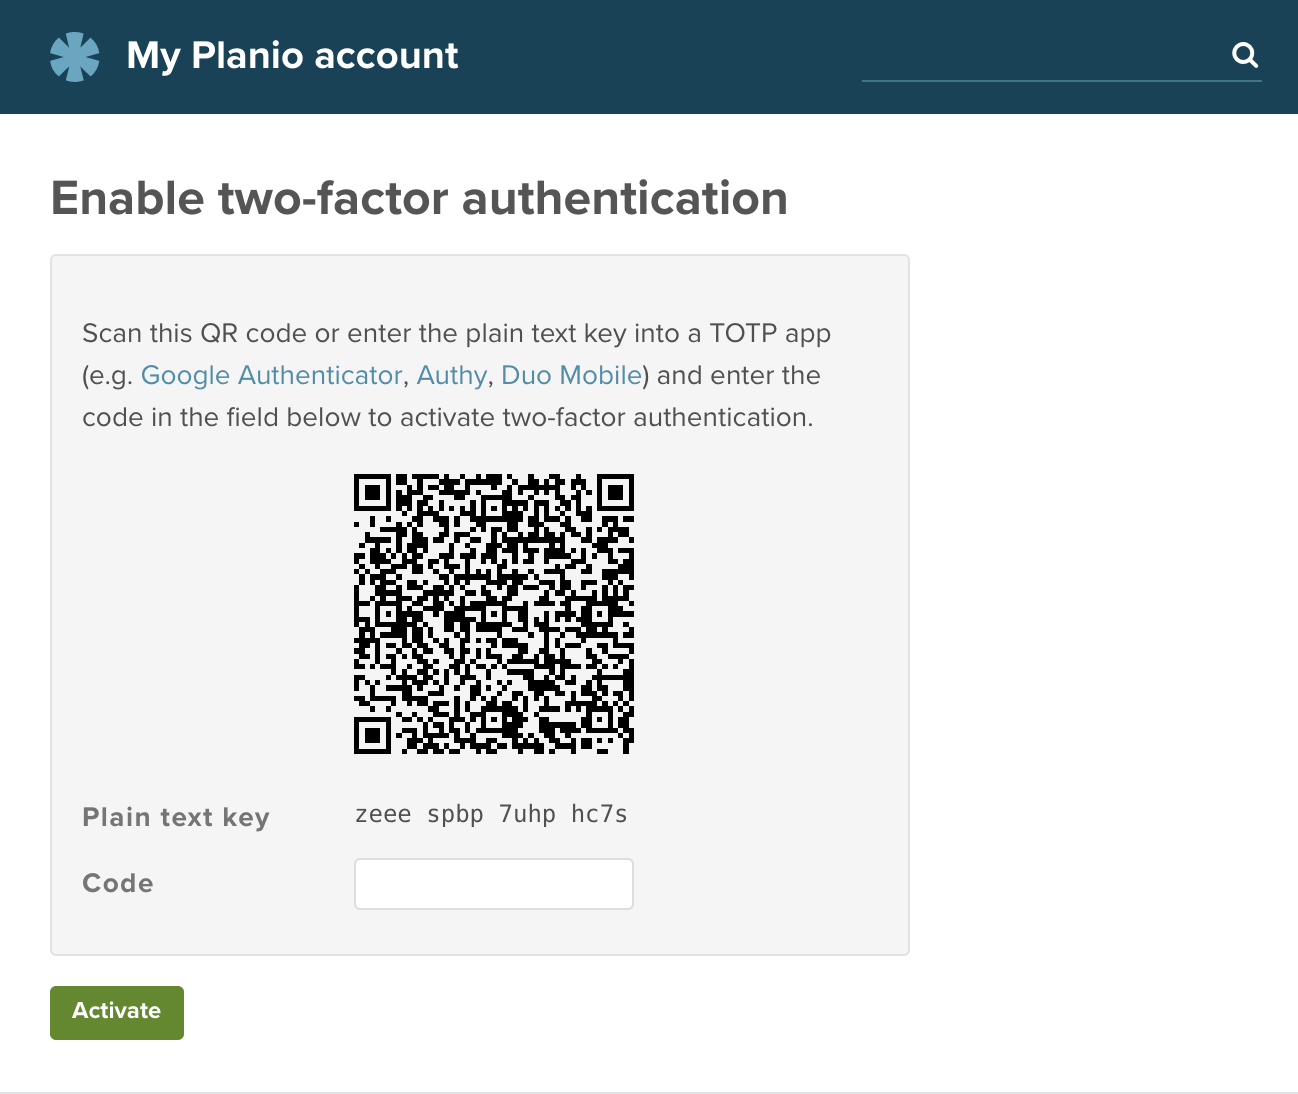 two-factor-authentication-scan-qr-code@2x.png